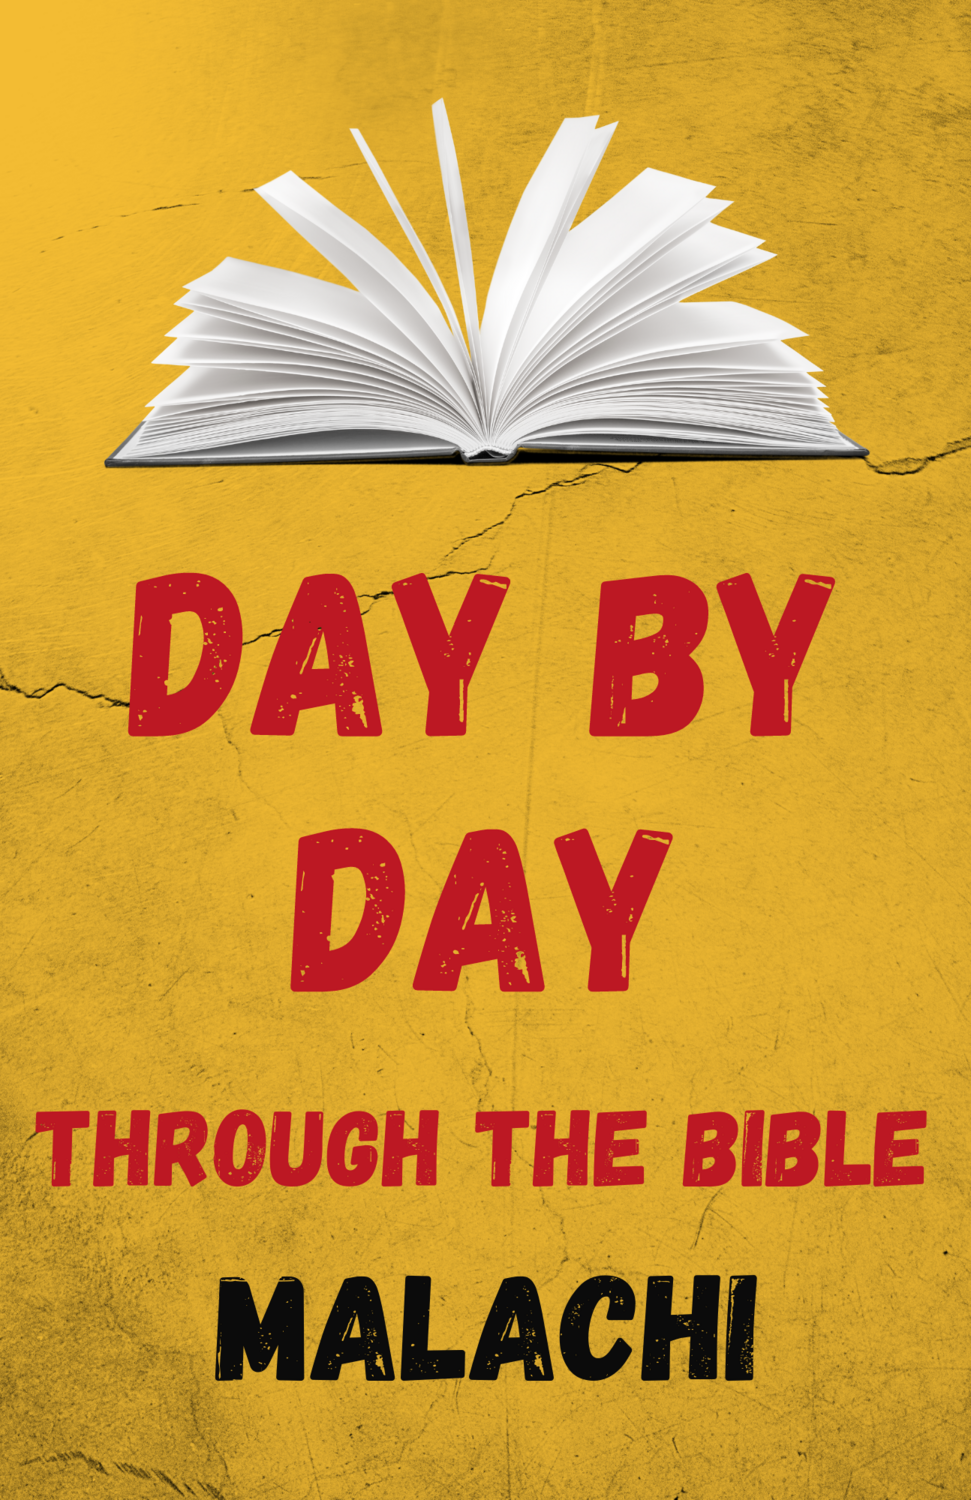 Day by Day Through the Bible: Four Days in Malachi - Digital Download